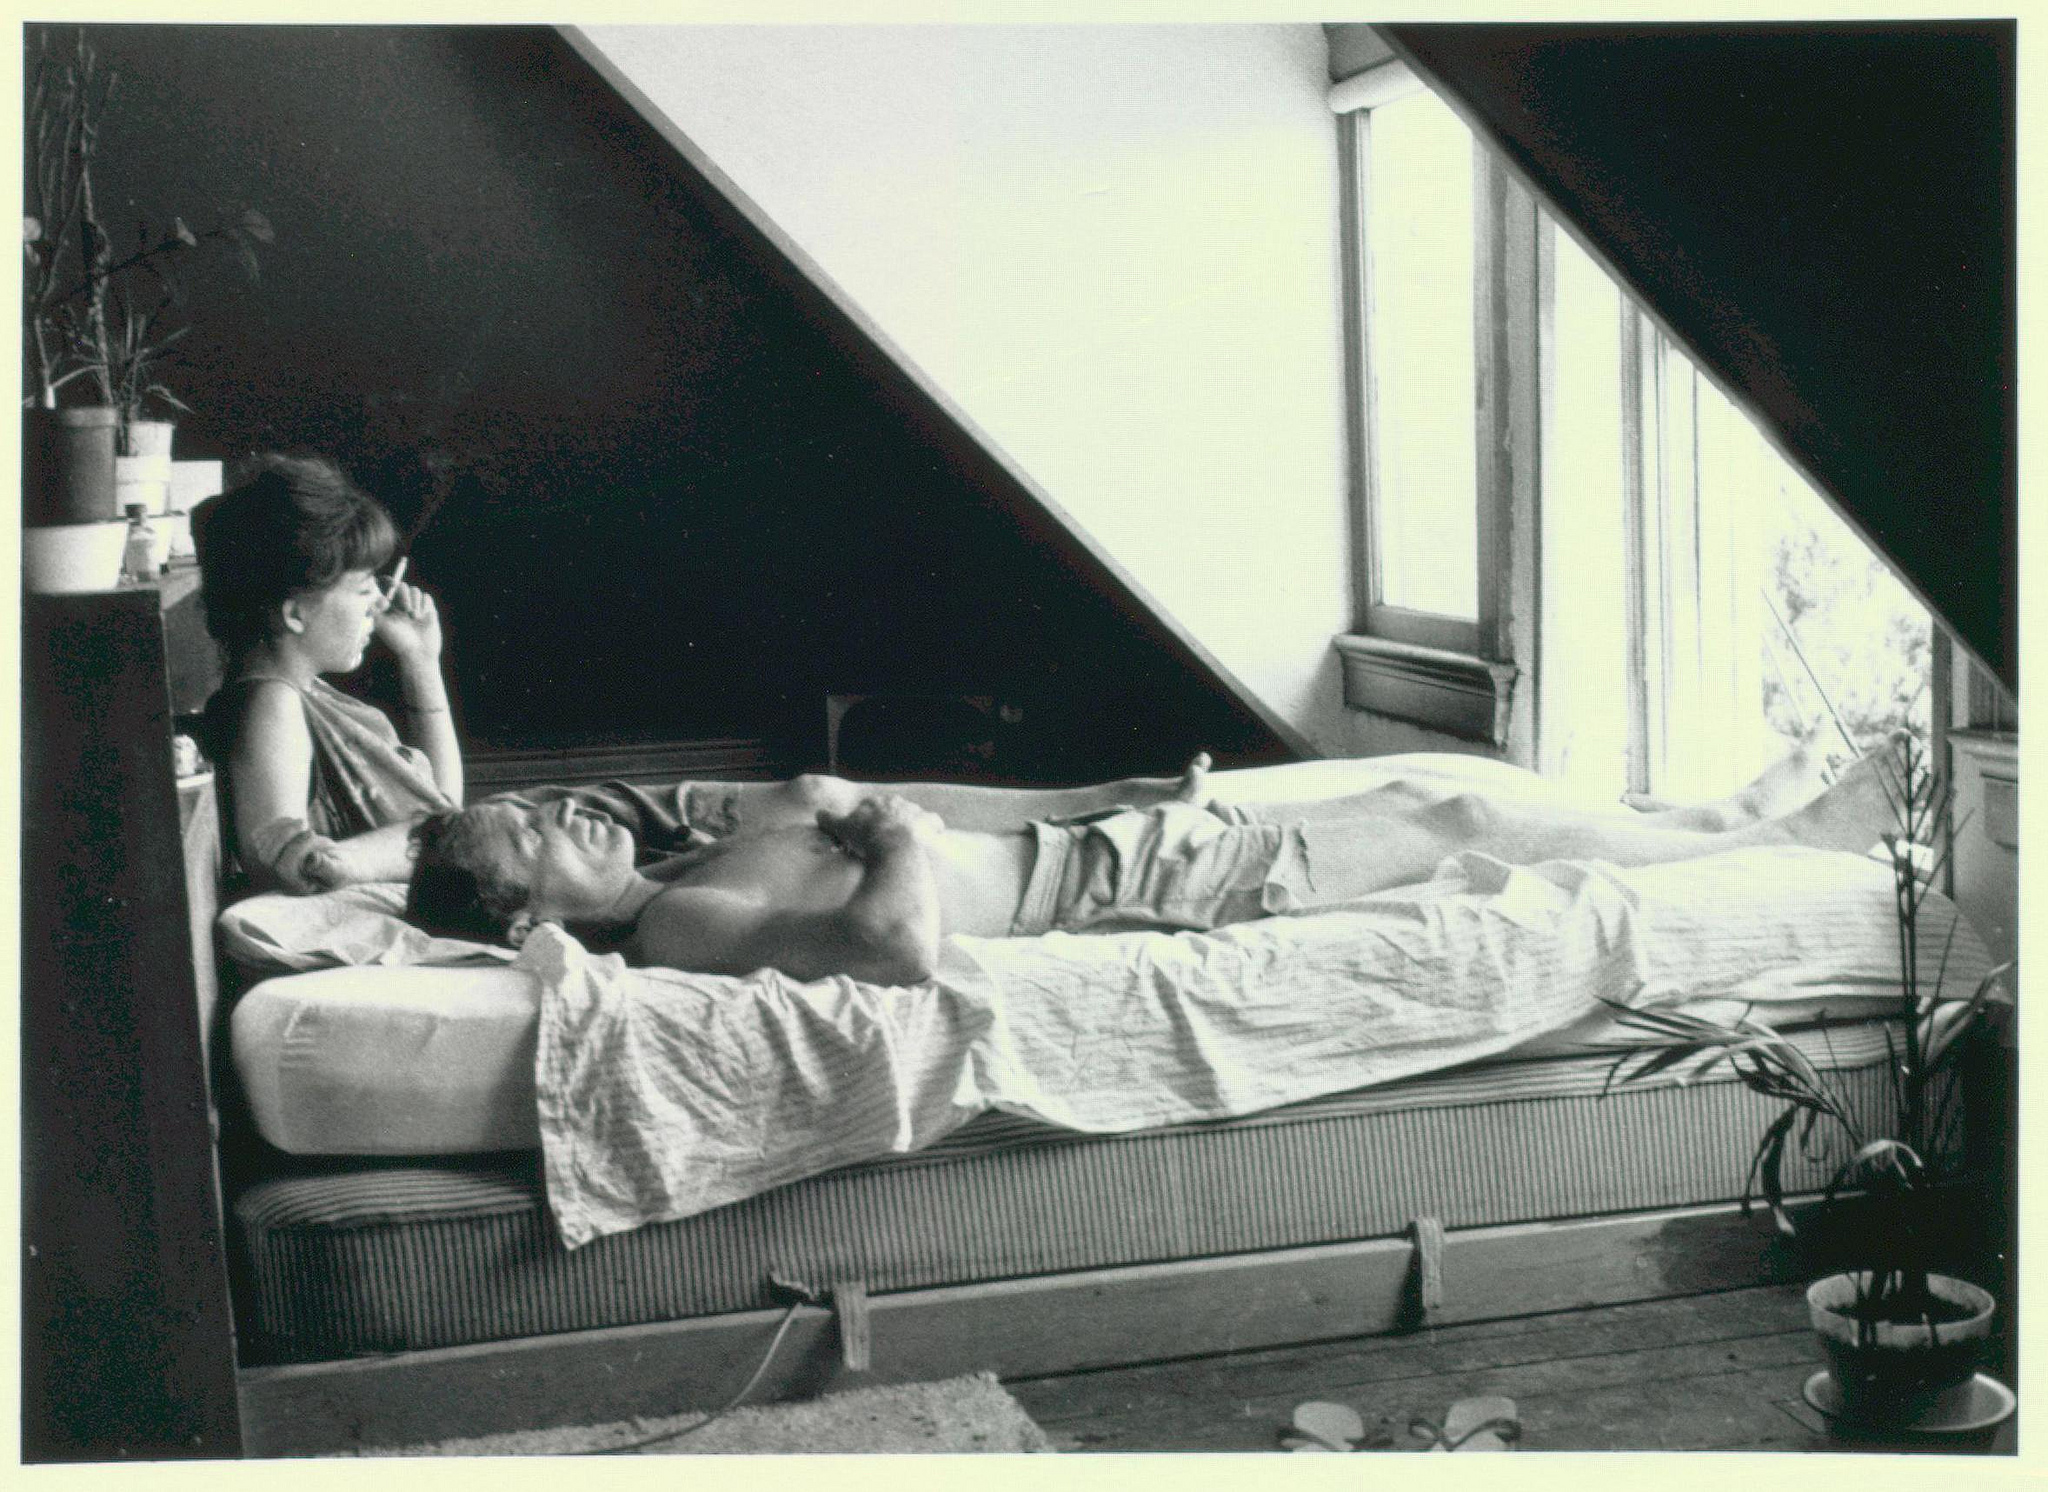 Neal Cassady in Millbrook, NY reclining on bed with lady friend, 1964